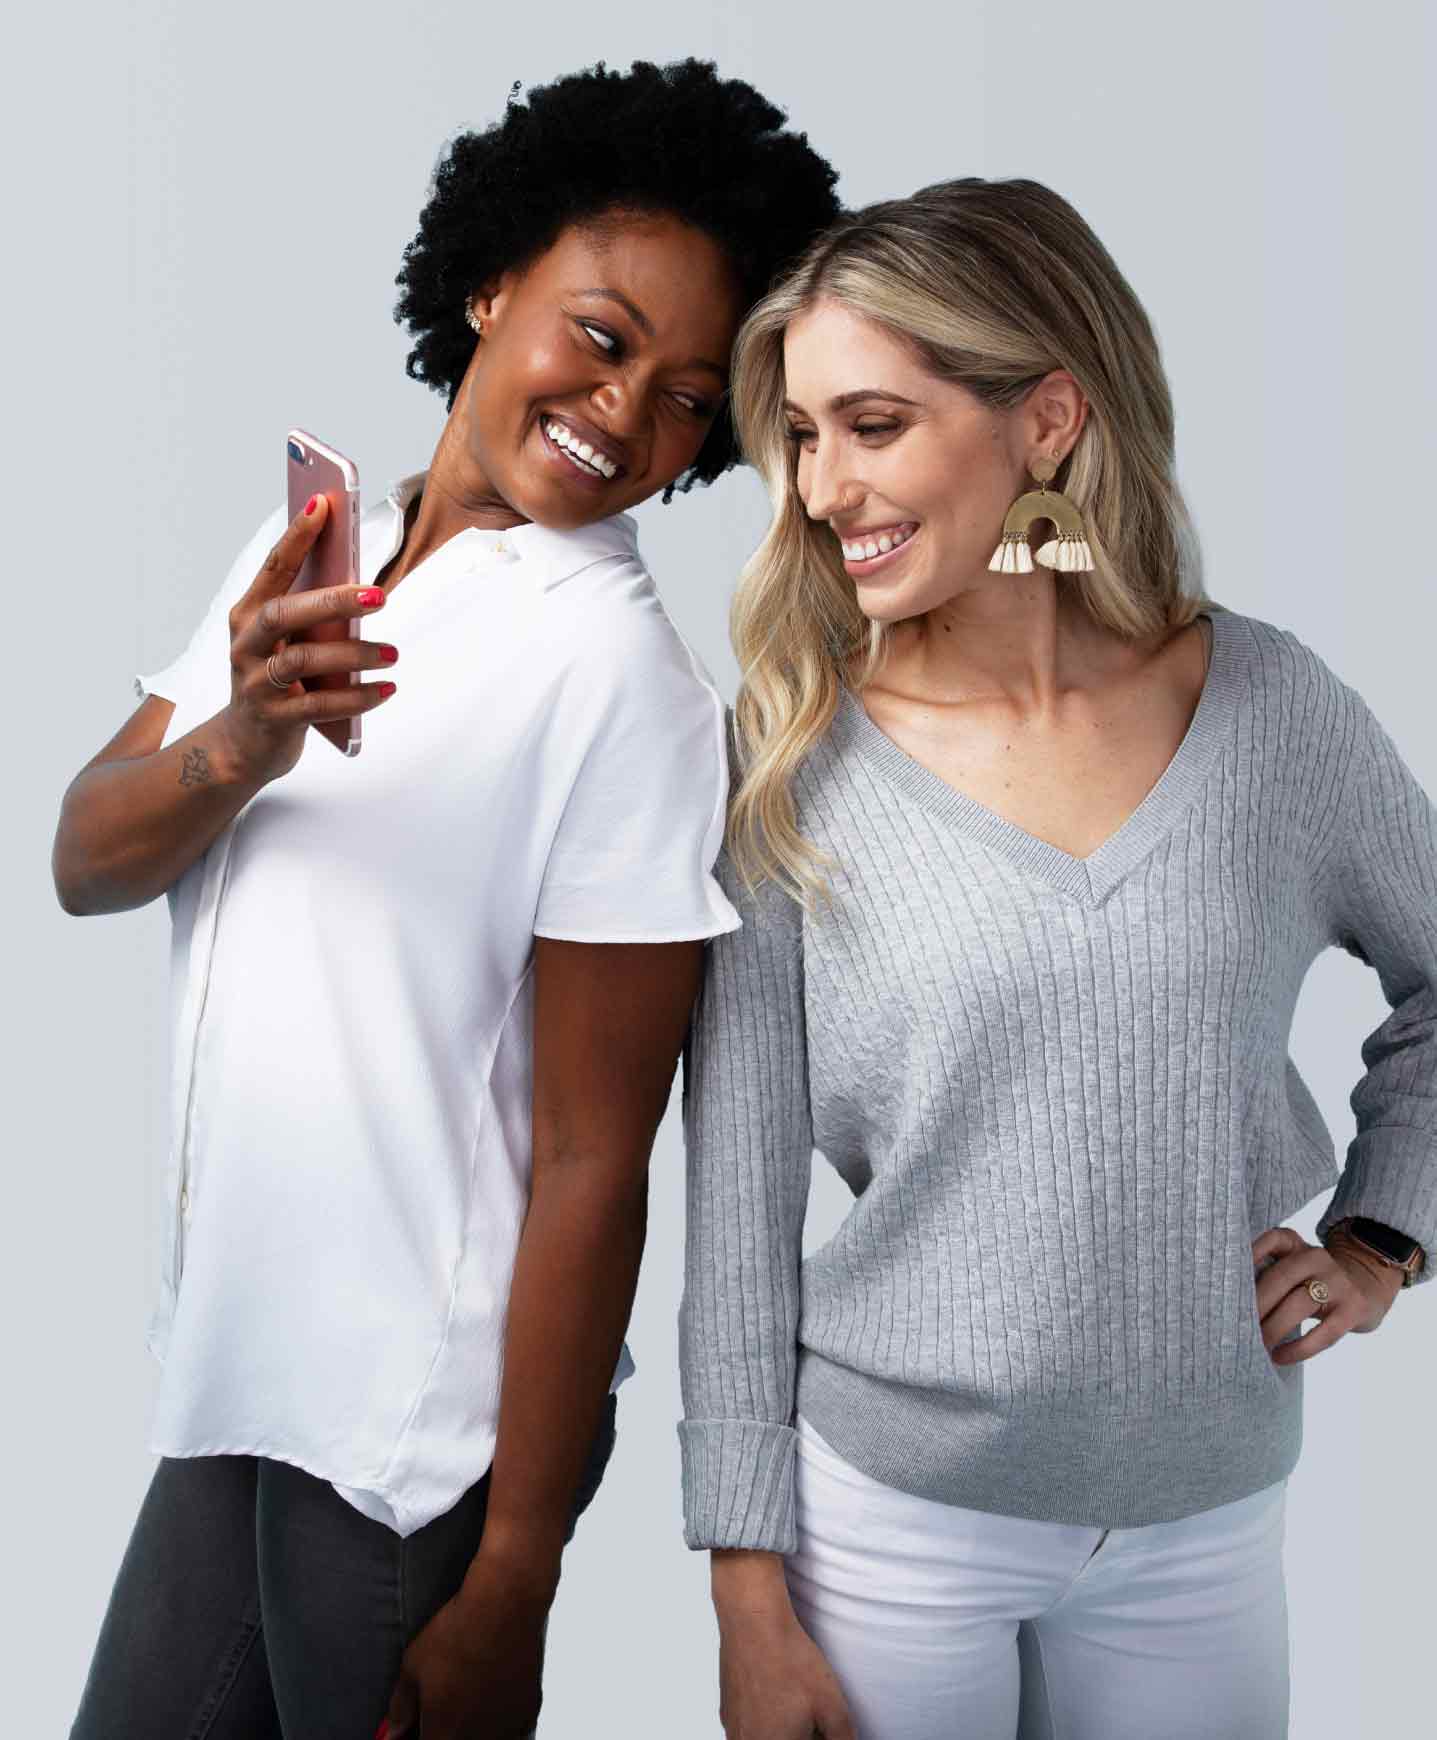 Two people looking at phone while smiling